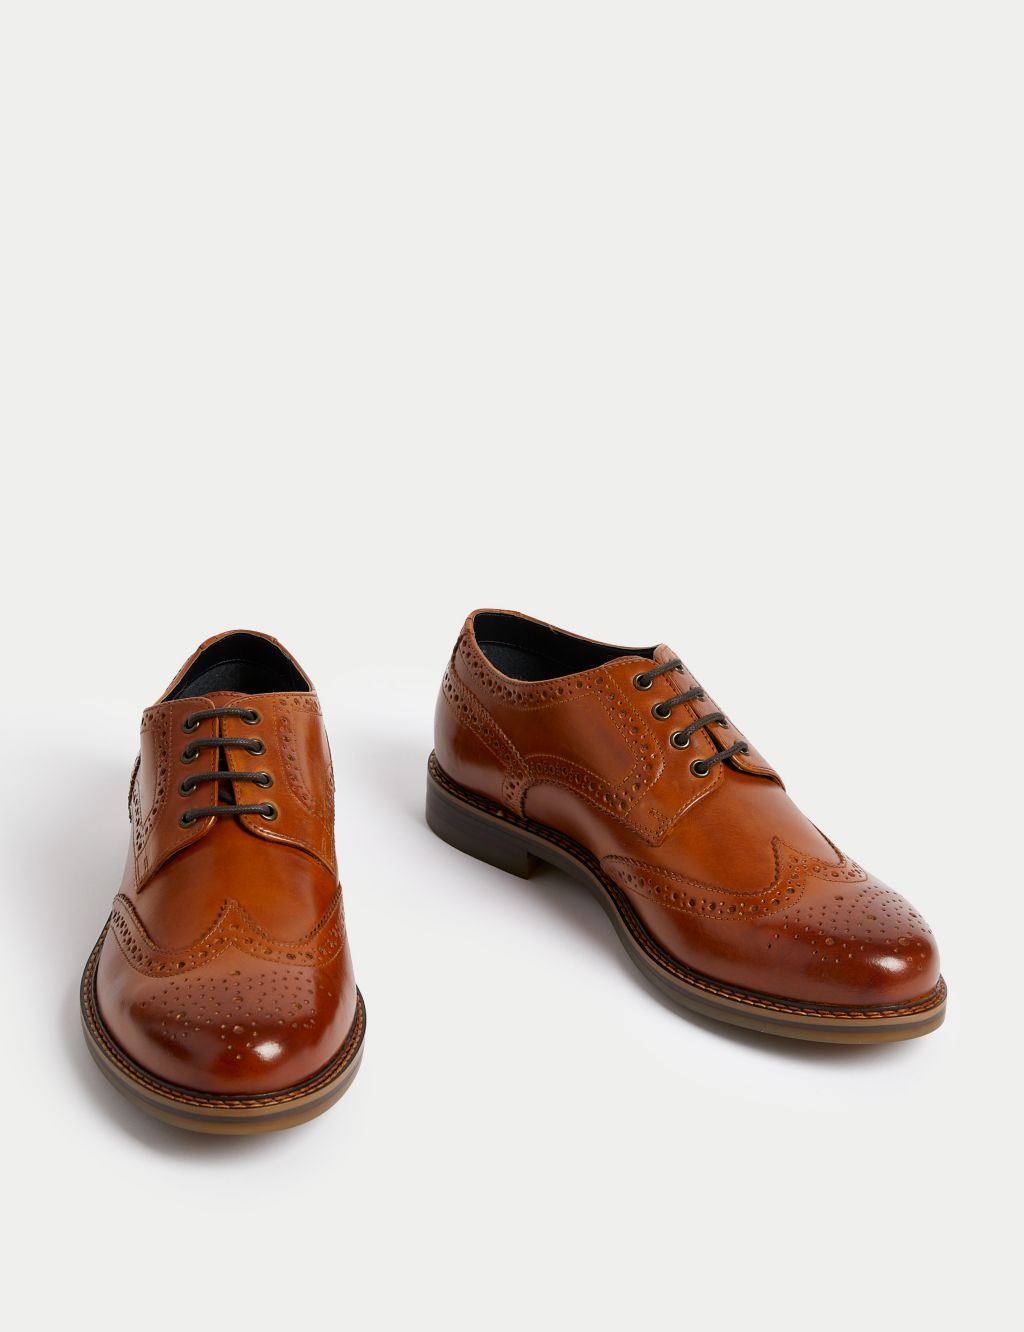 Wide Fit Leather Brogues image 2